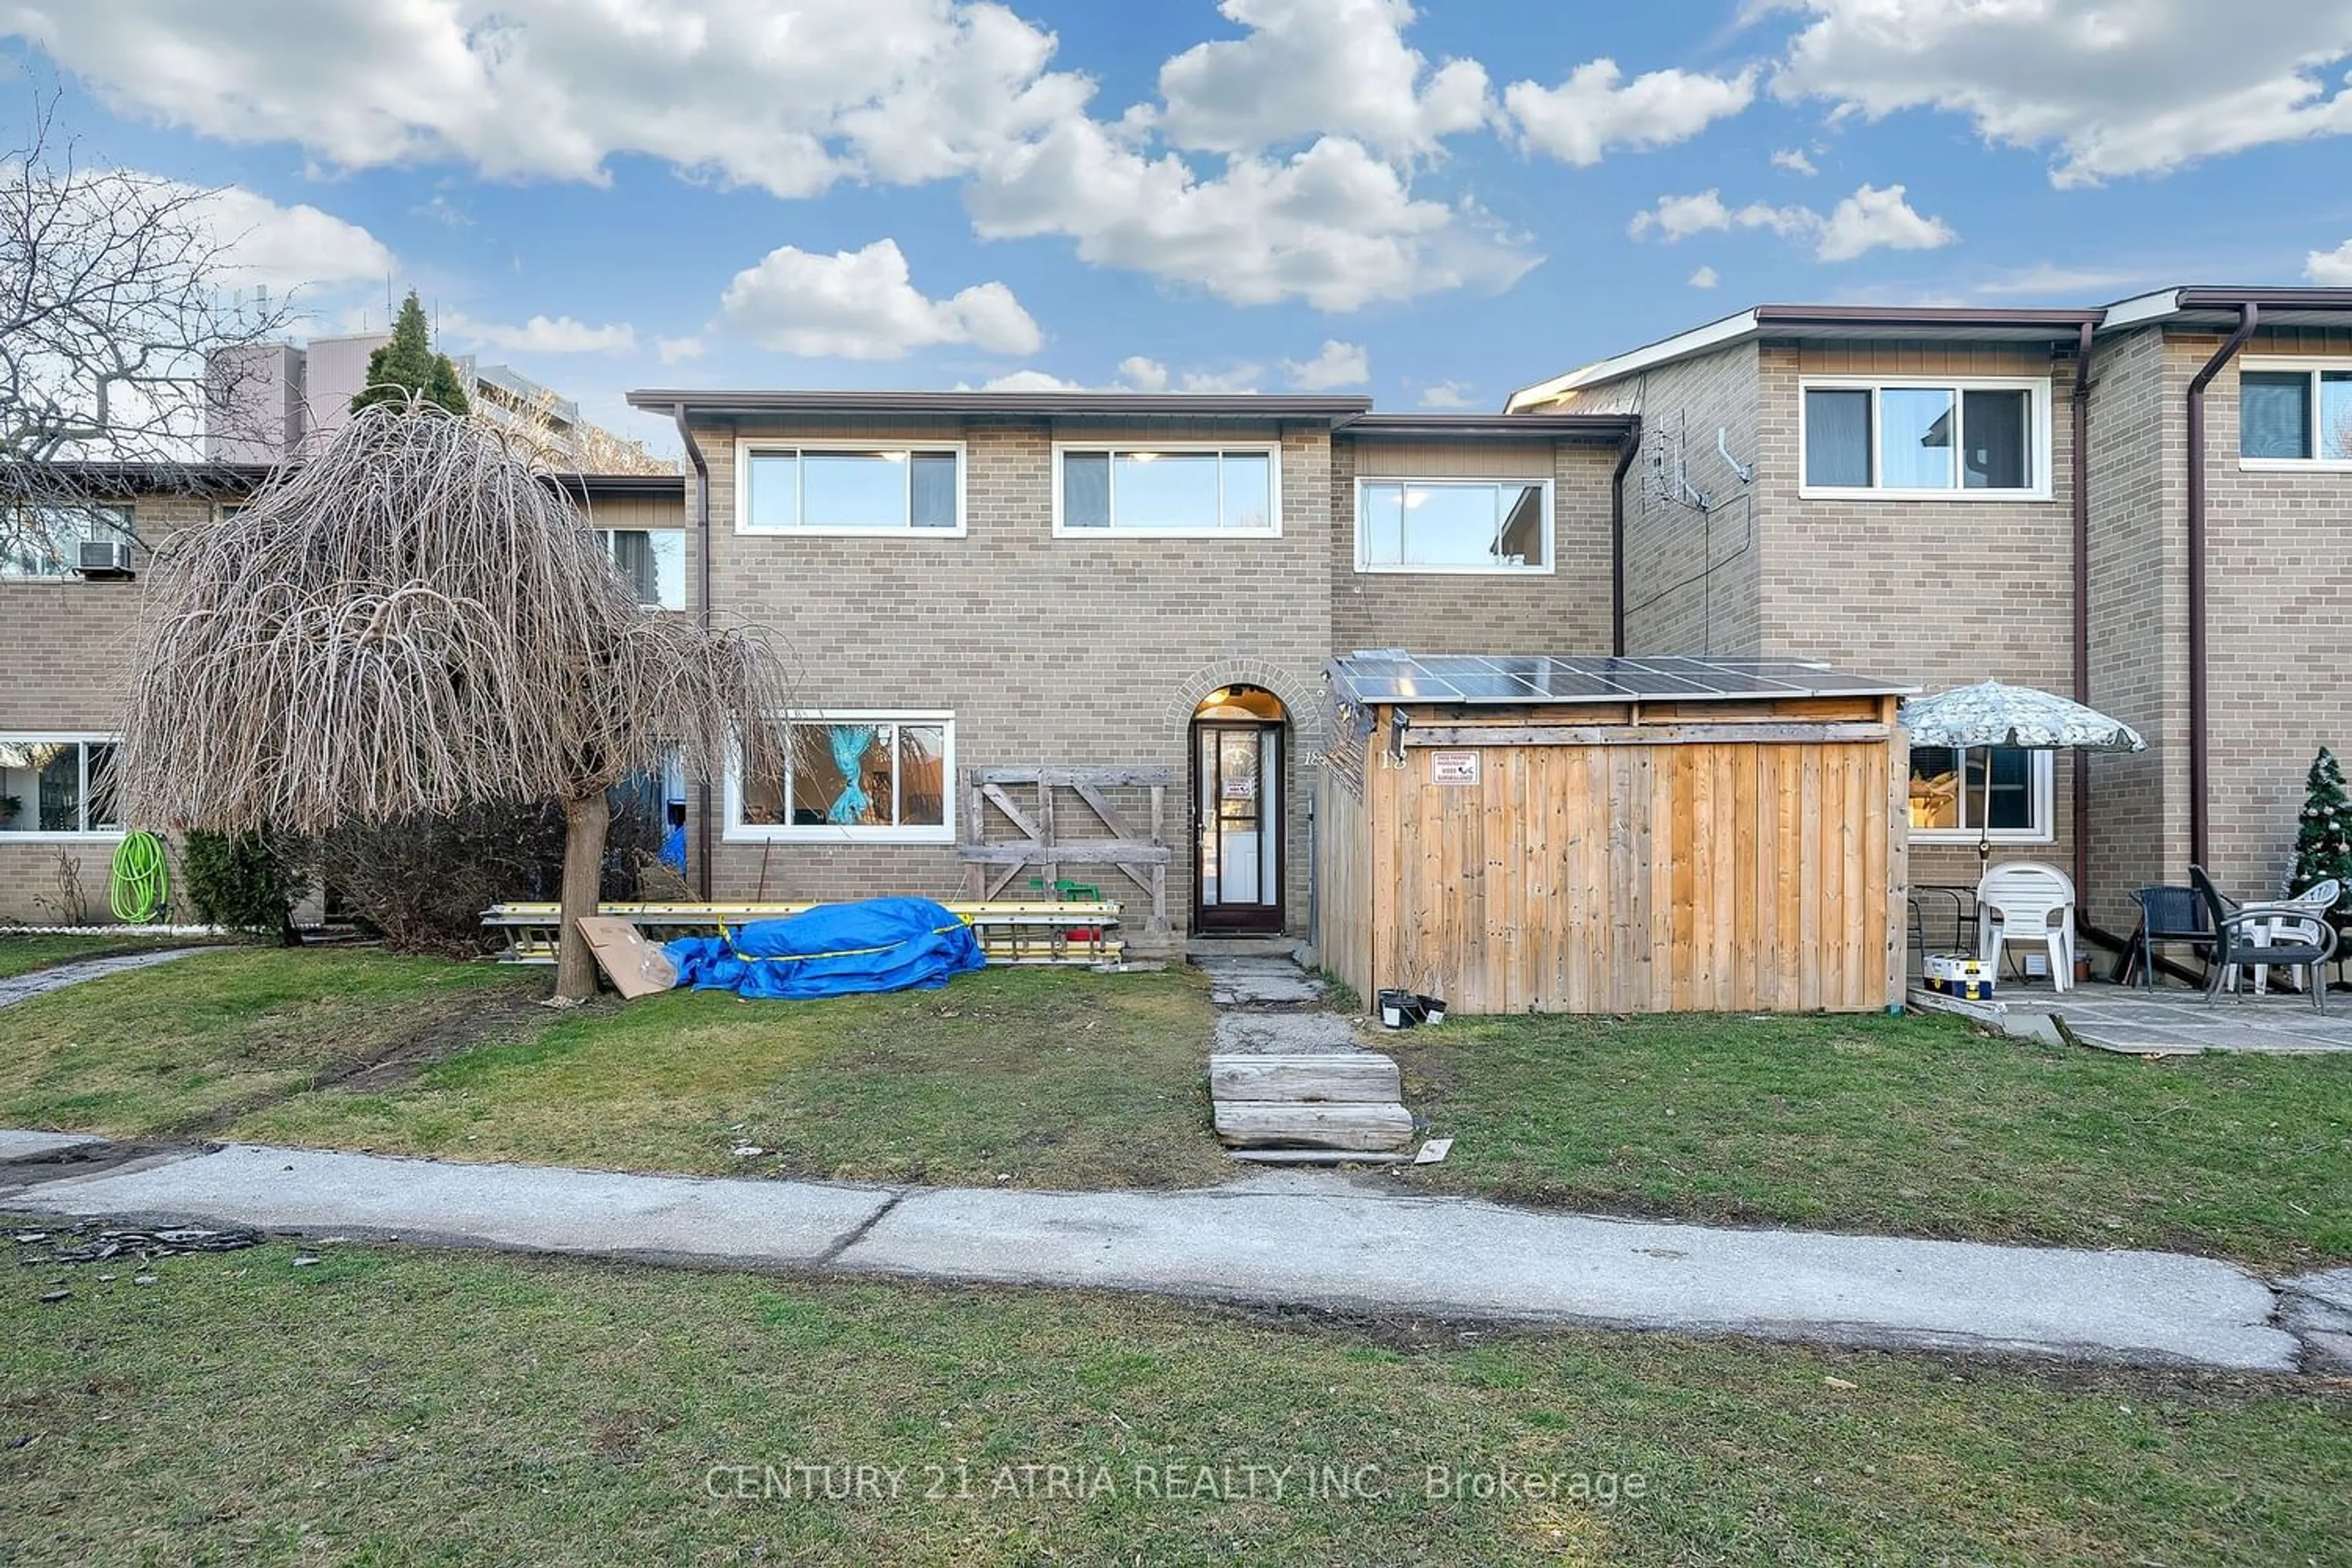 Frontside or backside of a home for 73 Driftwood Ave #18, Toronto Ontario M3N 2M7